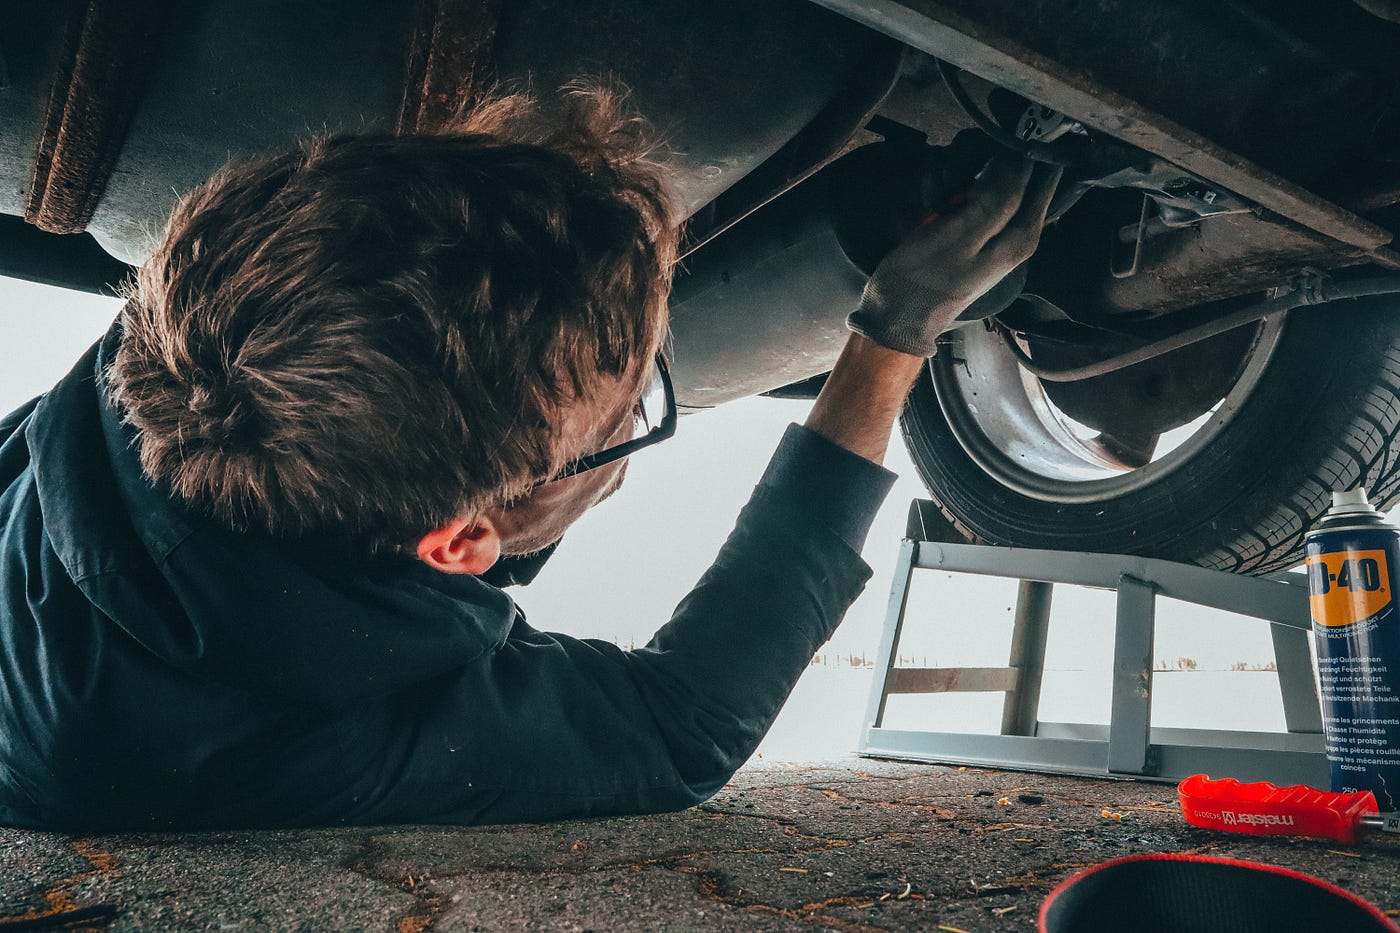 A mechanic fixing the chassis of a vehicle (metaphor: the vehicle is your body). Mic drop.